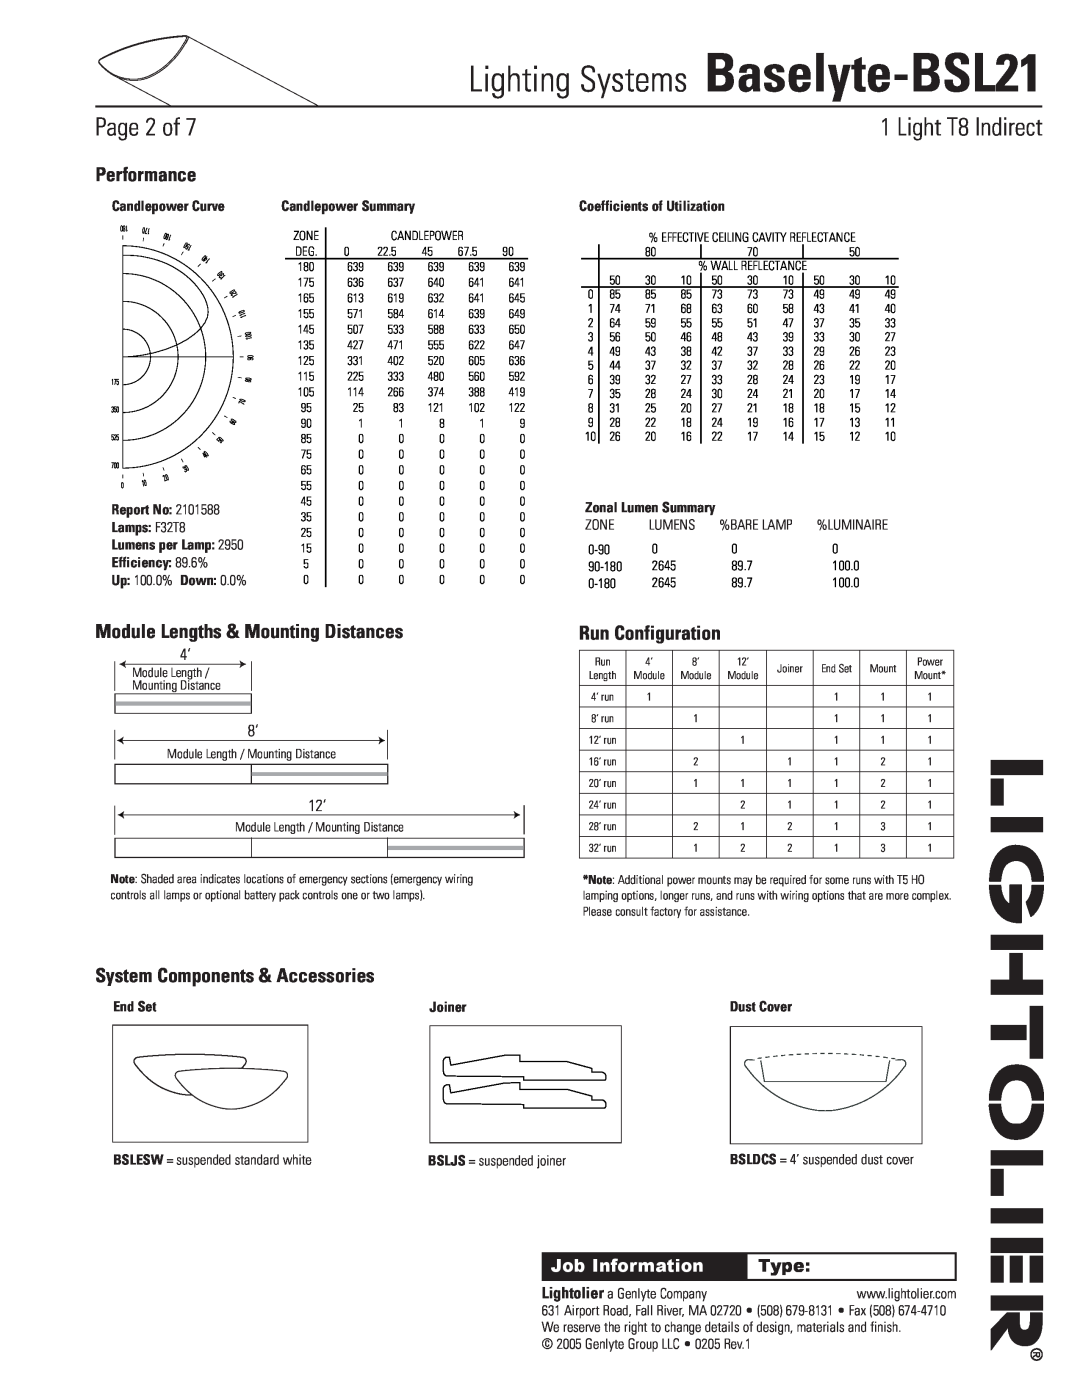 Lightolier Lighting Systems Baselyte-BSL21, Page of, Performance, Module Lengths & Mounting Distances, Type, End Set 